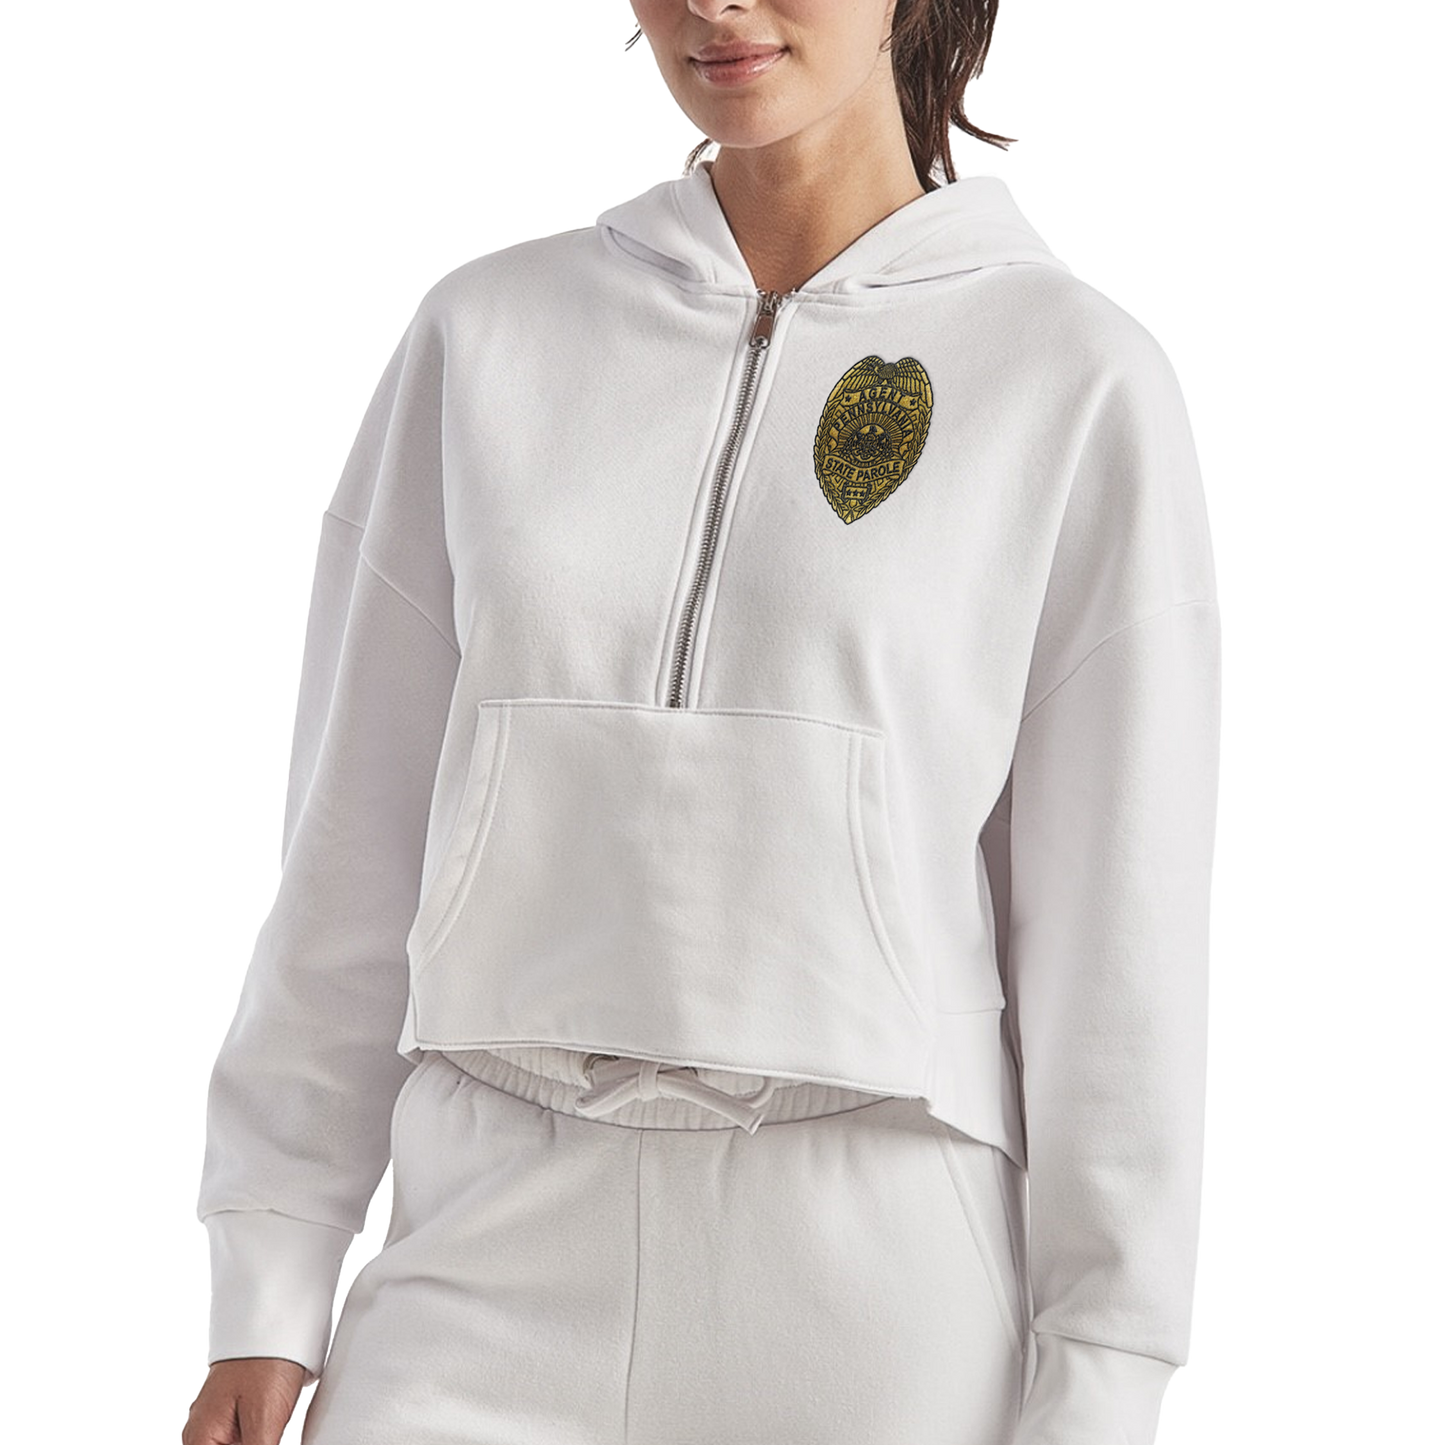 Ladies' Half-Zip Hooded Sweatshirt with Embroidered State Parole Agent Logos (Various Colors)